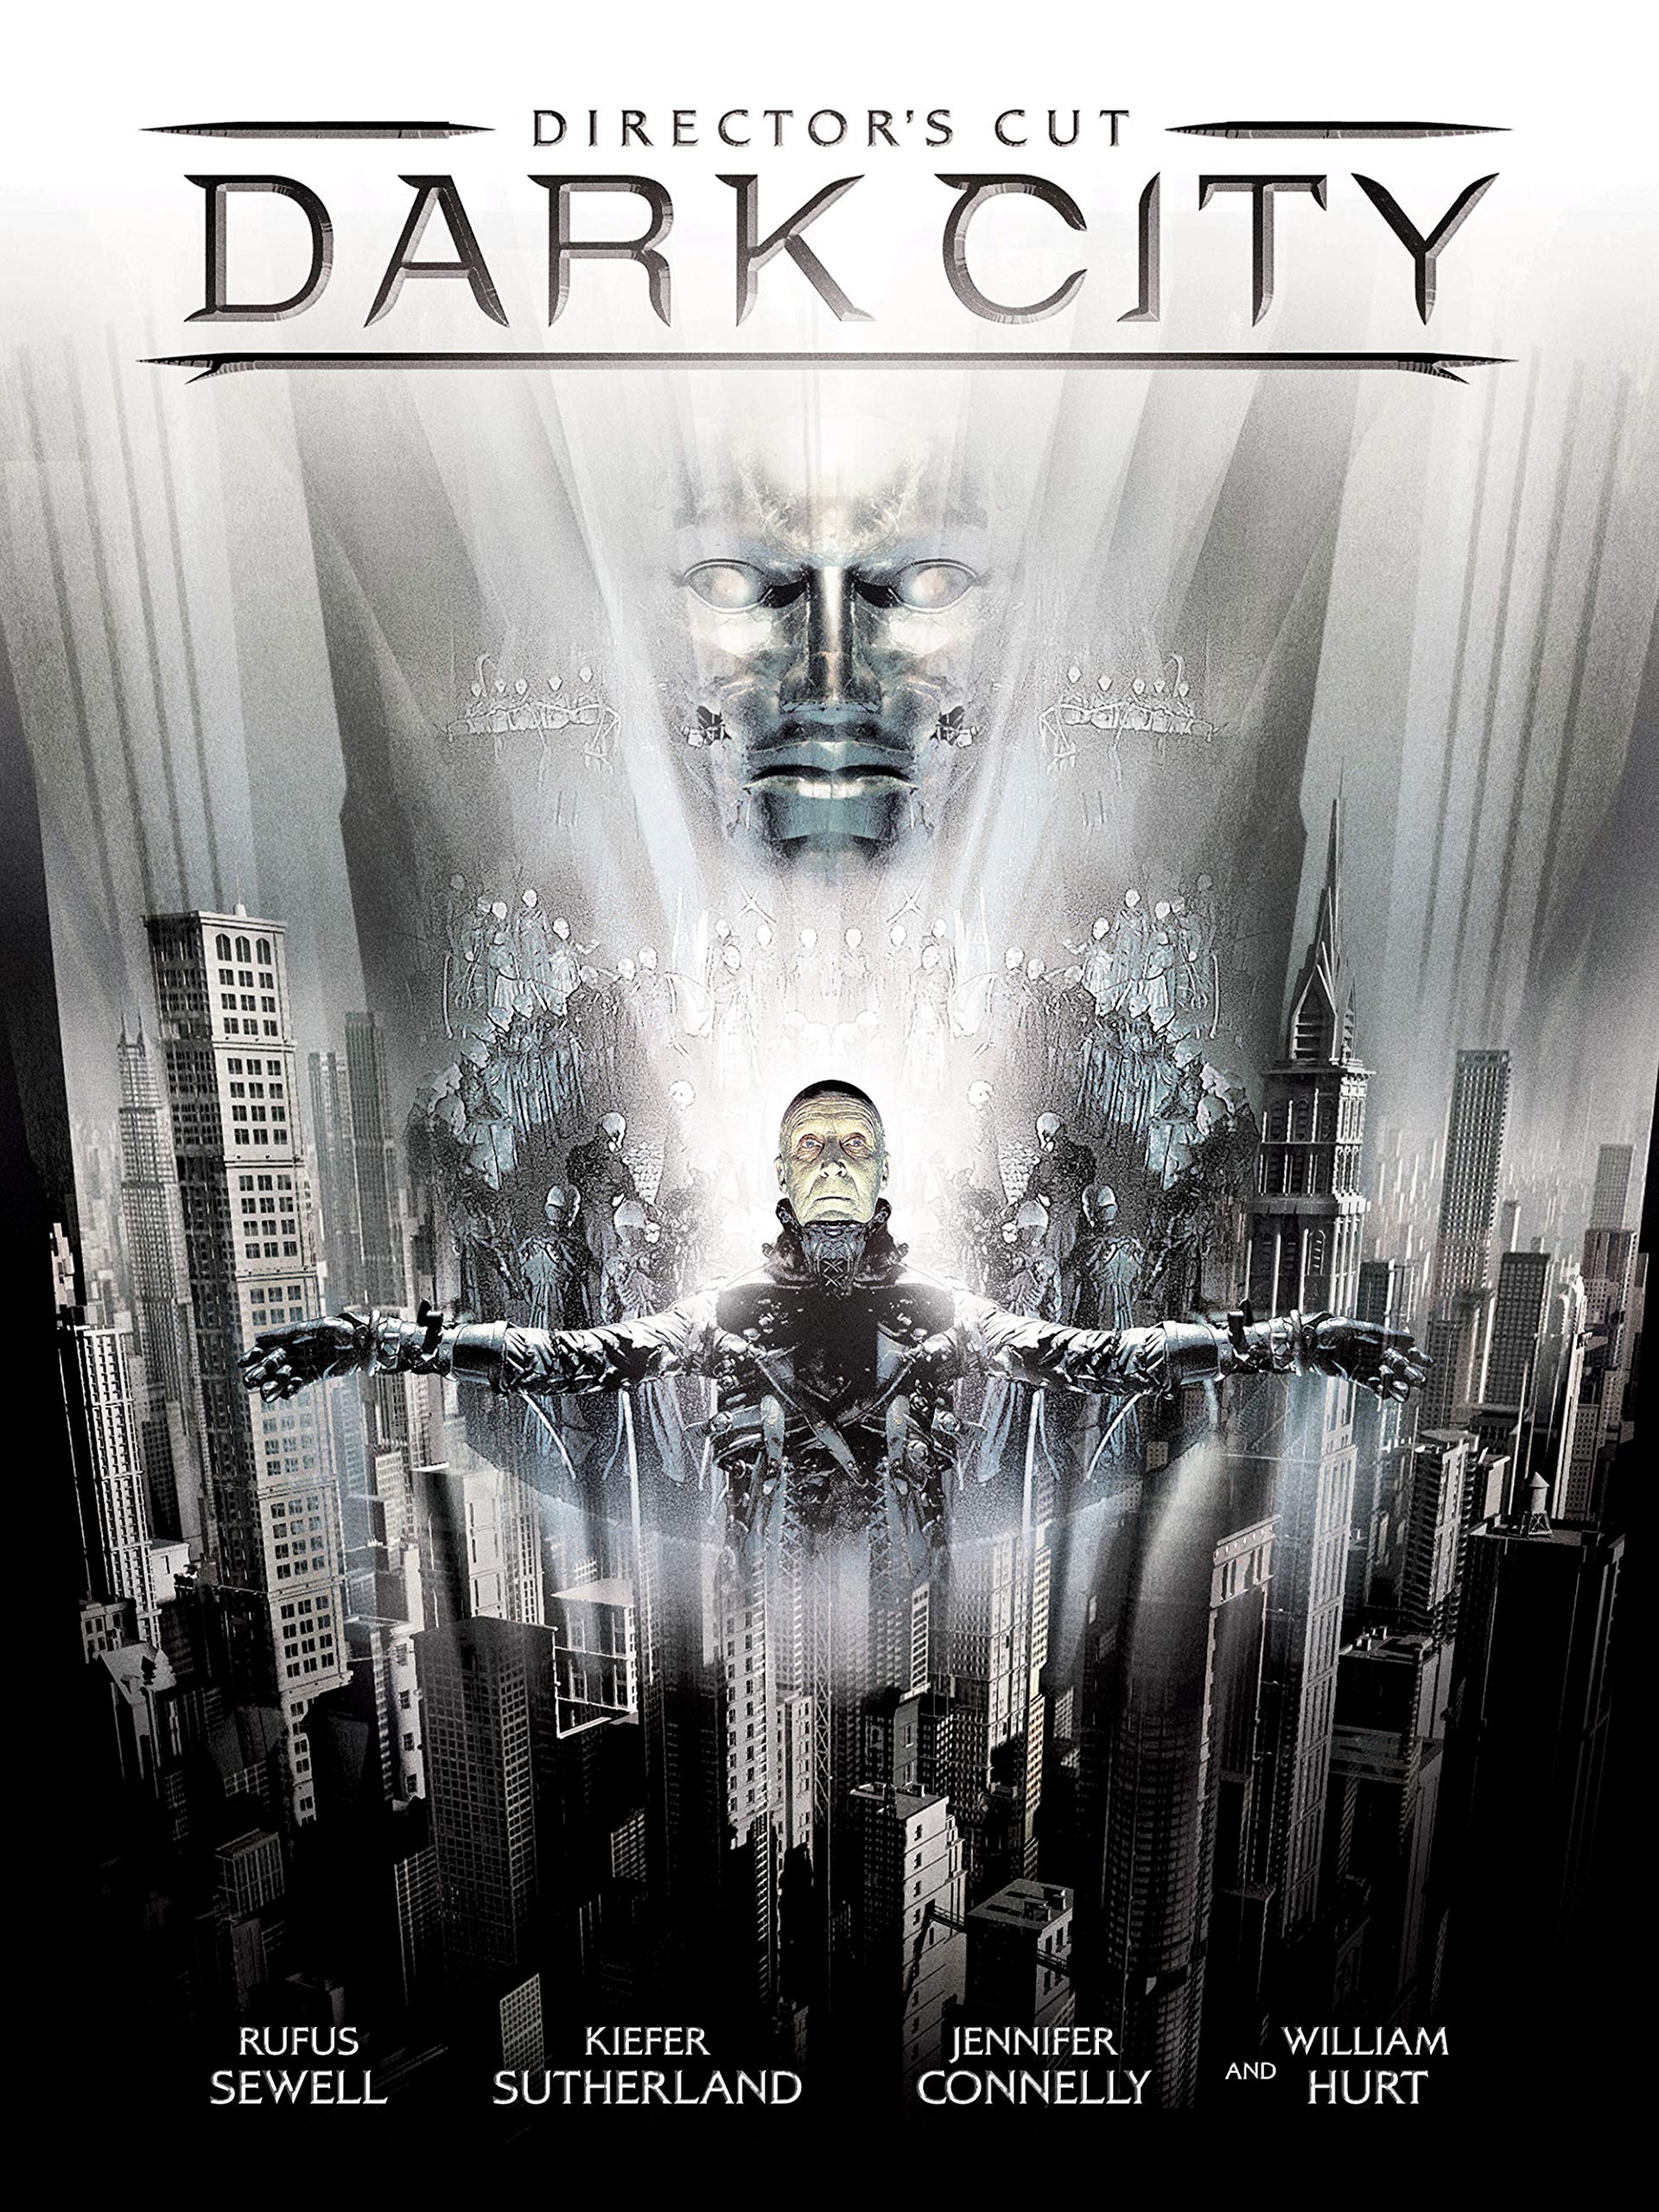 Cover for the Director's Cut of Dark City